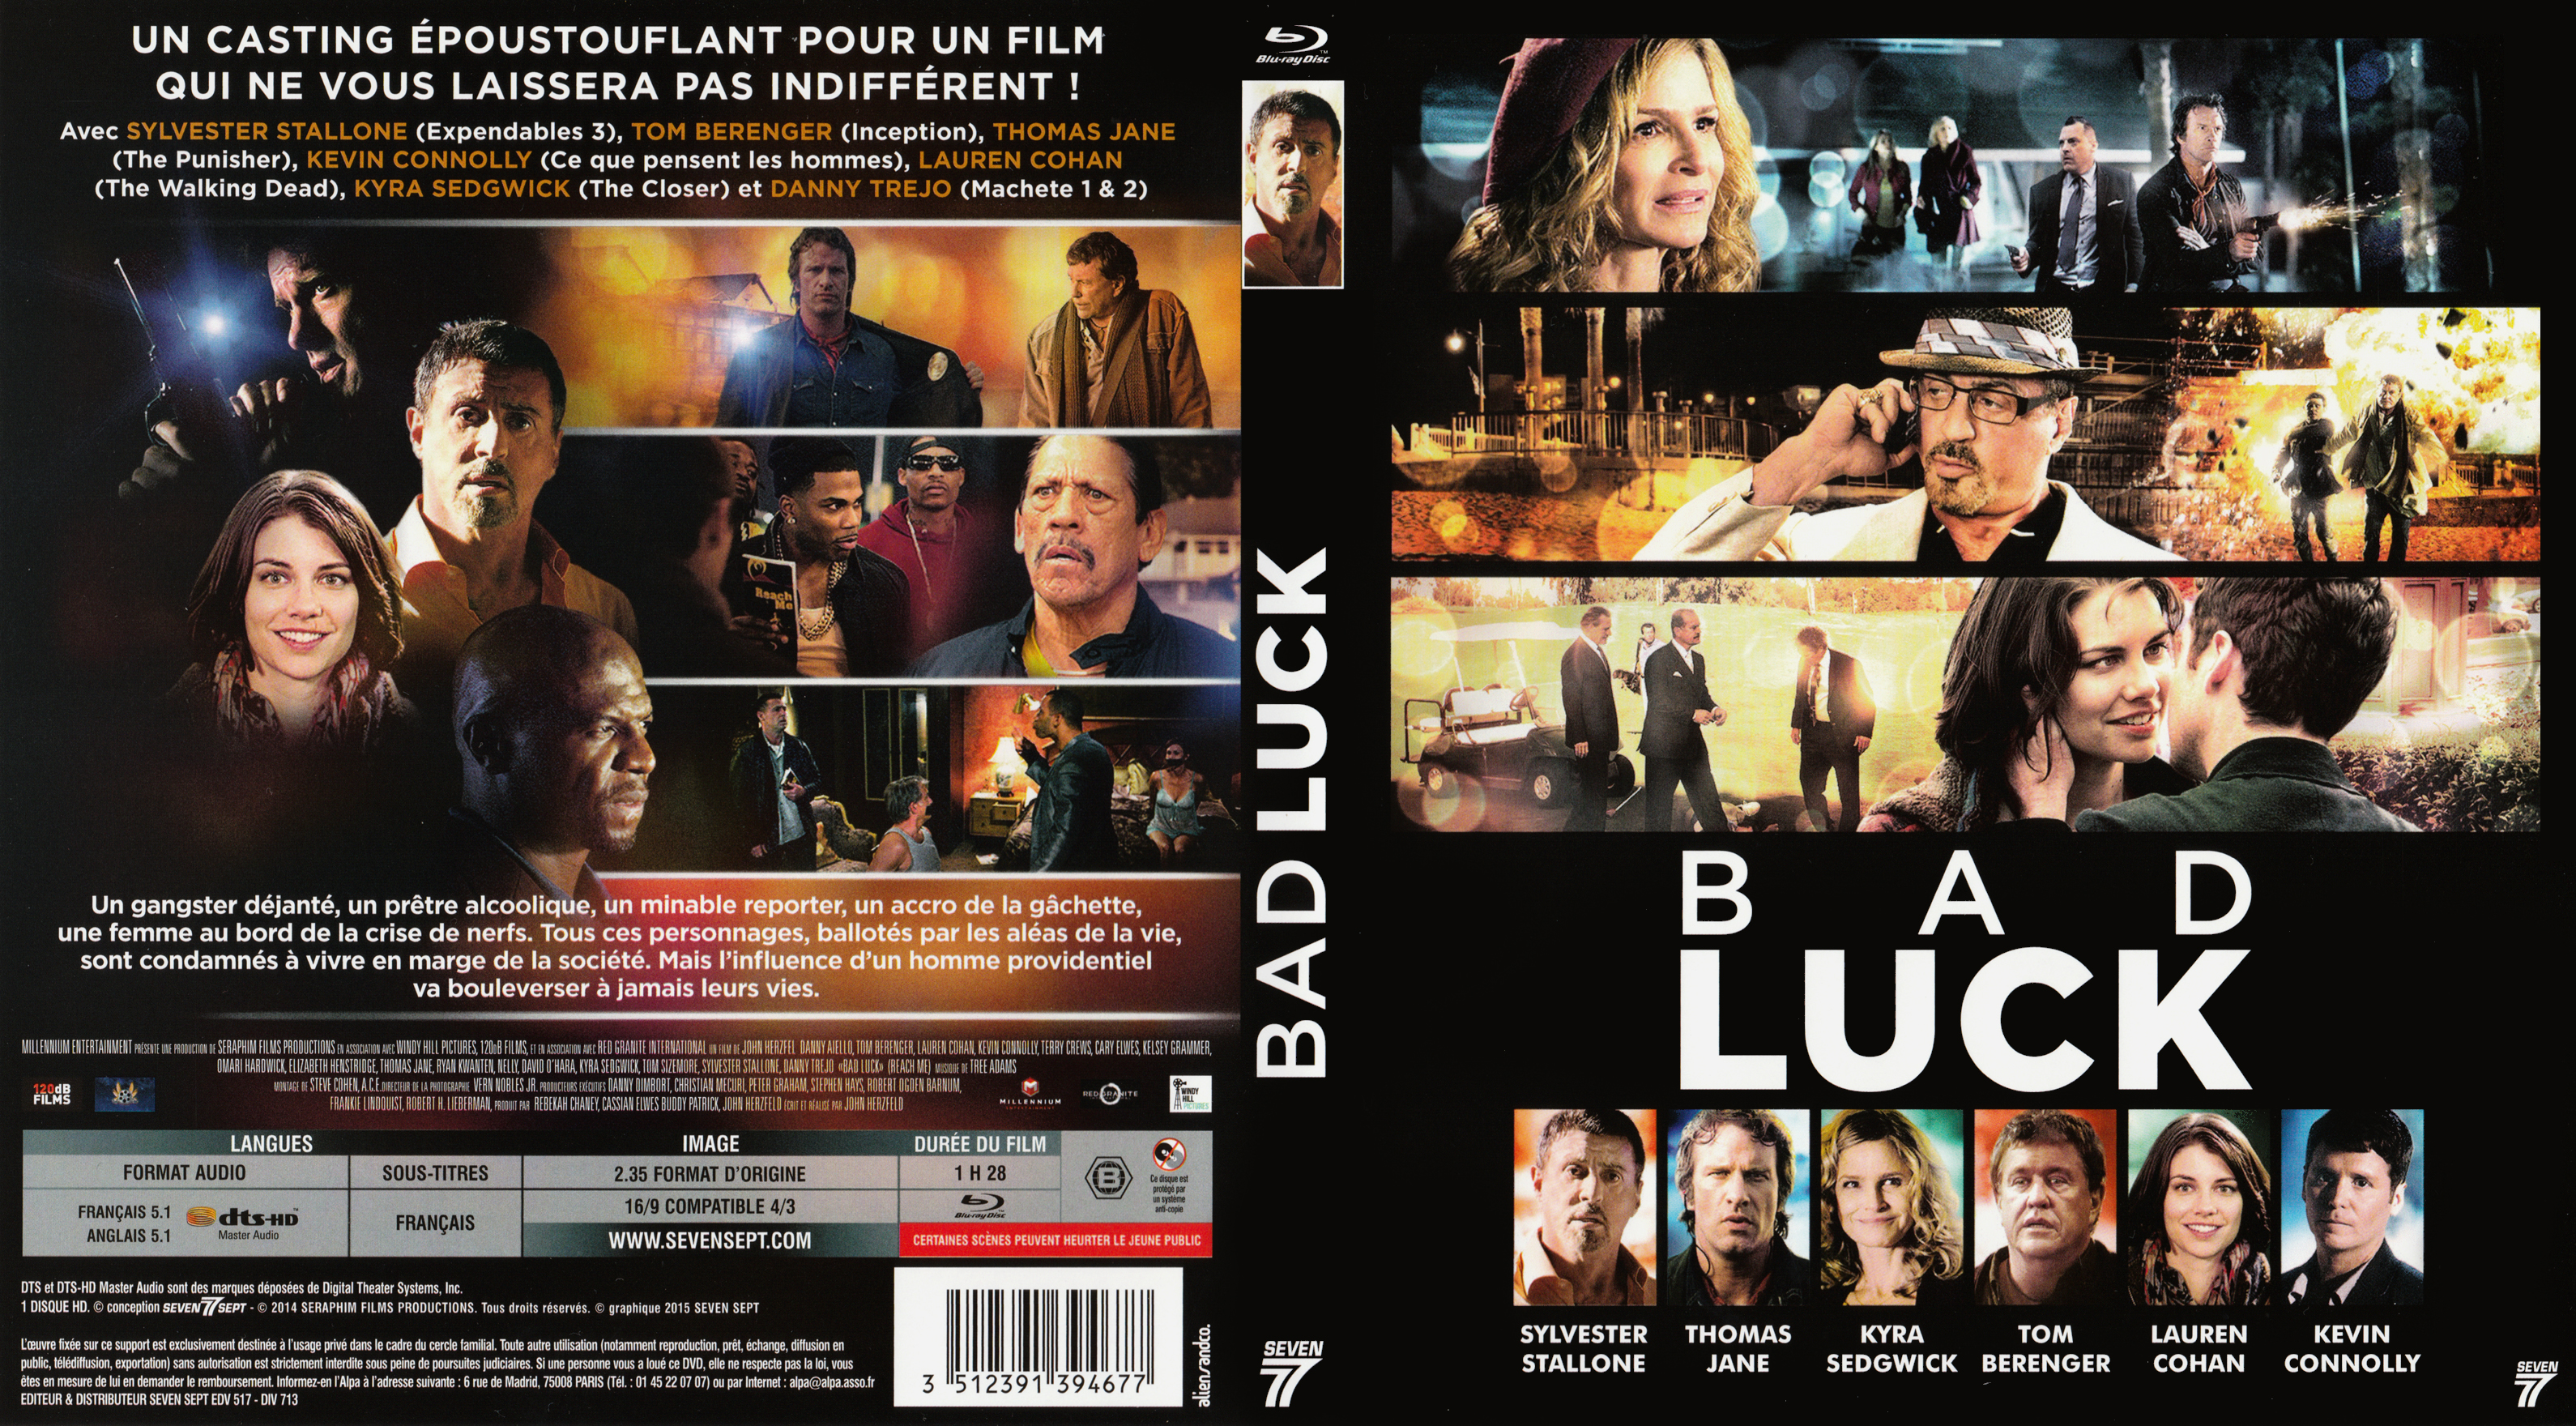 Jaquette DVD Bad luck (BLU-RAY)